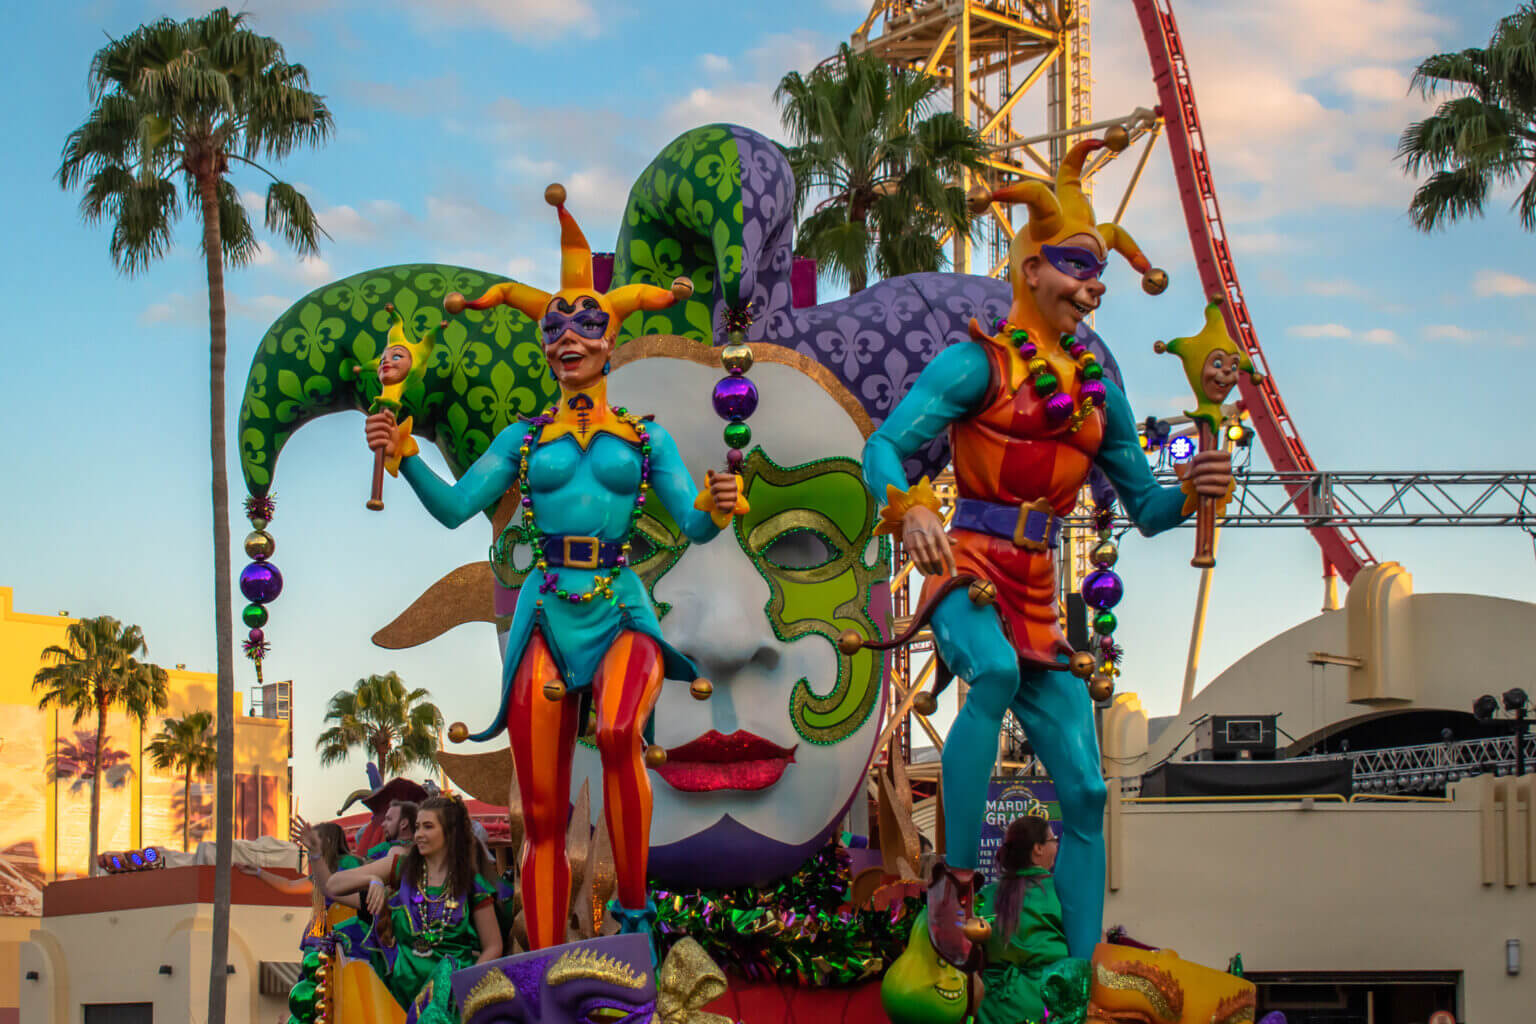 Universal Studios Mardi Gras 2021 Your Guide to Florida’s Biggest Party